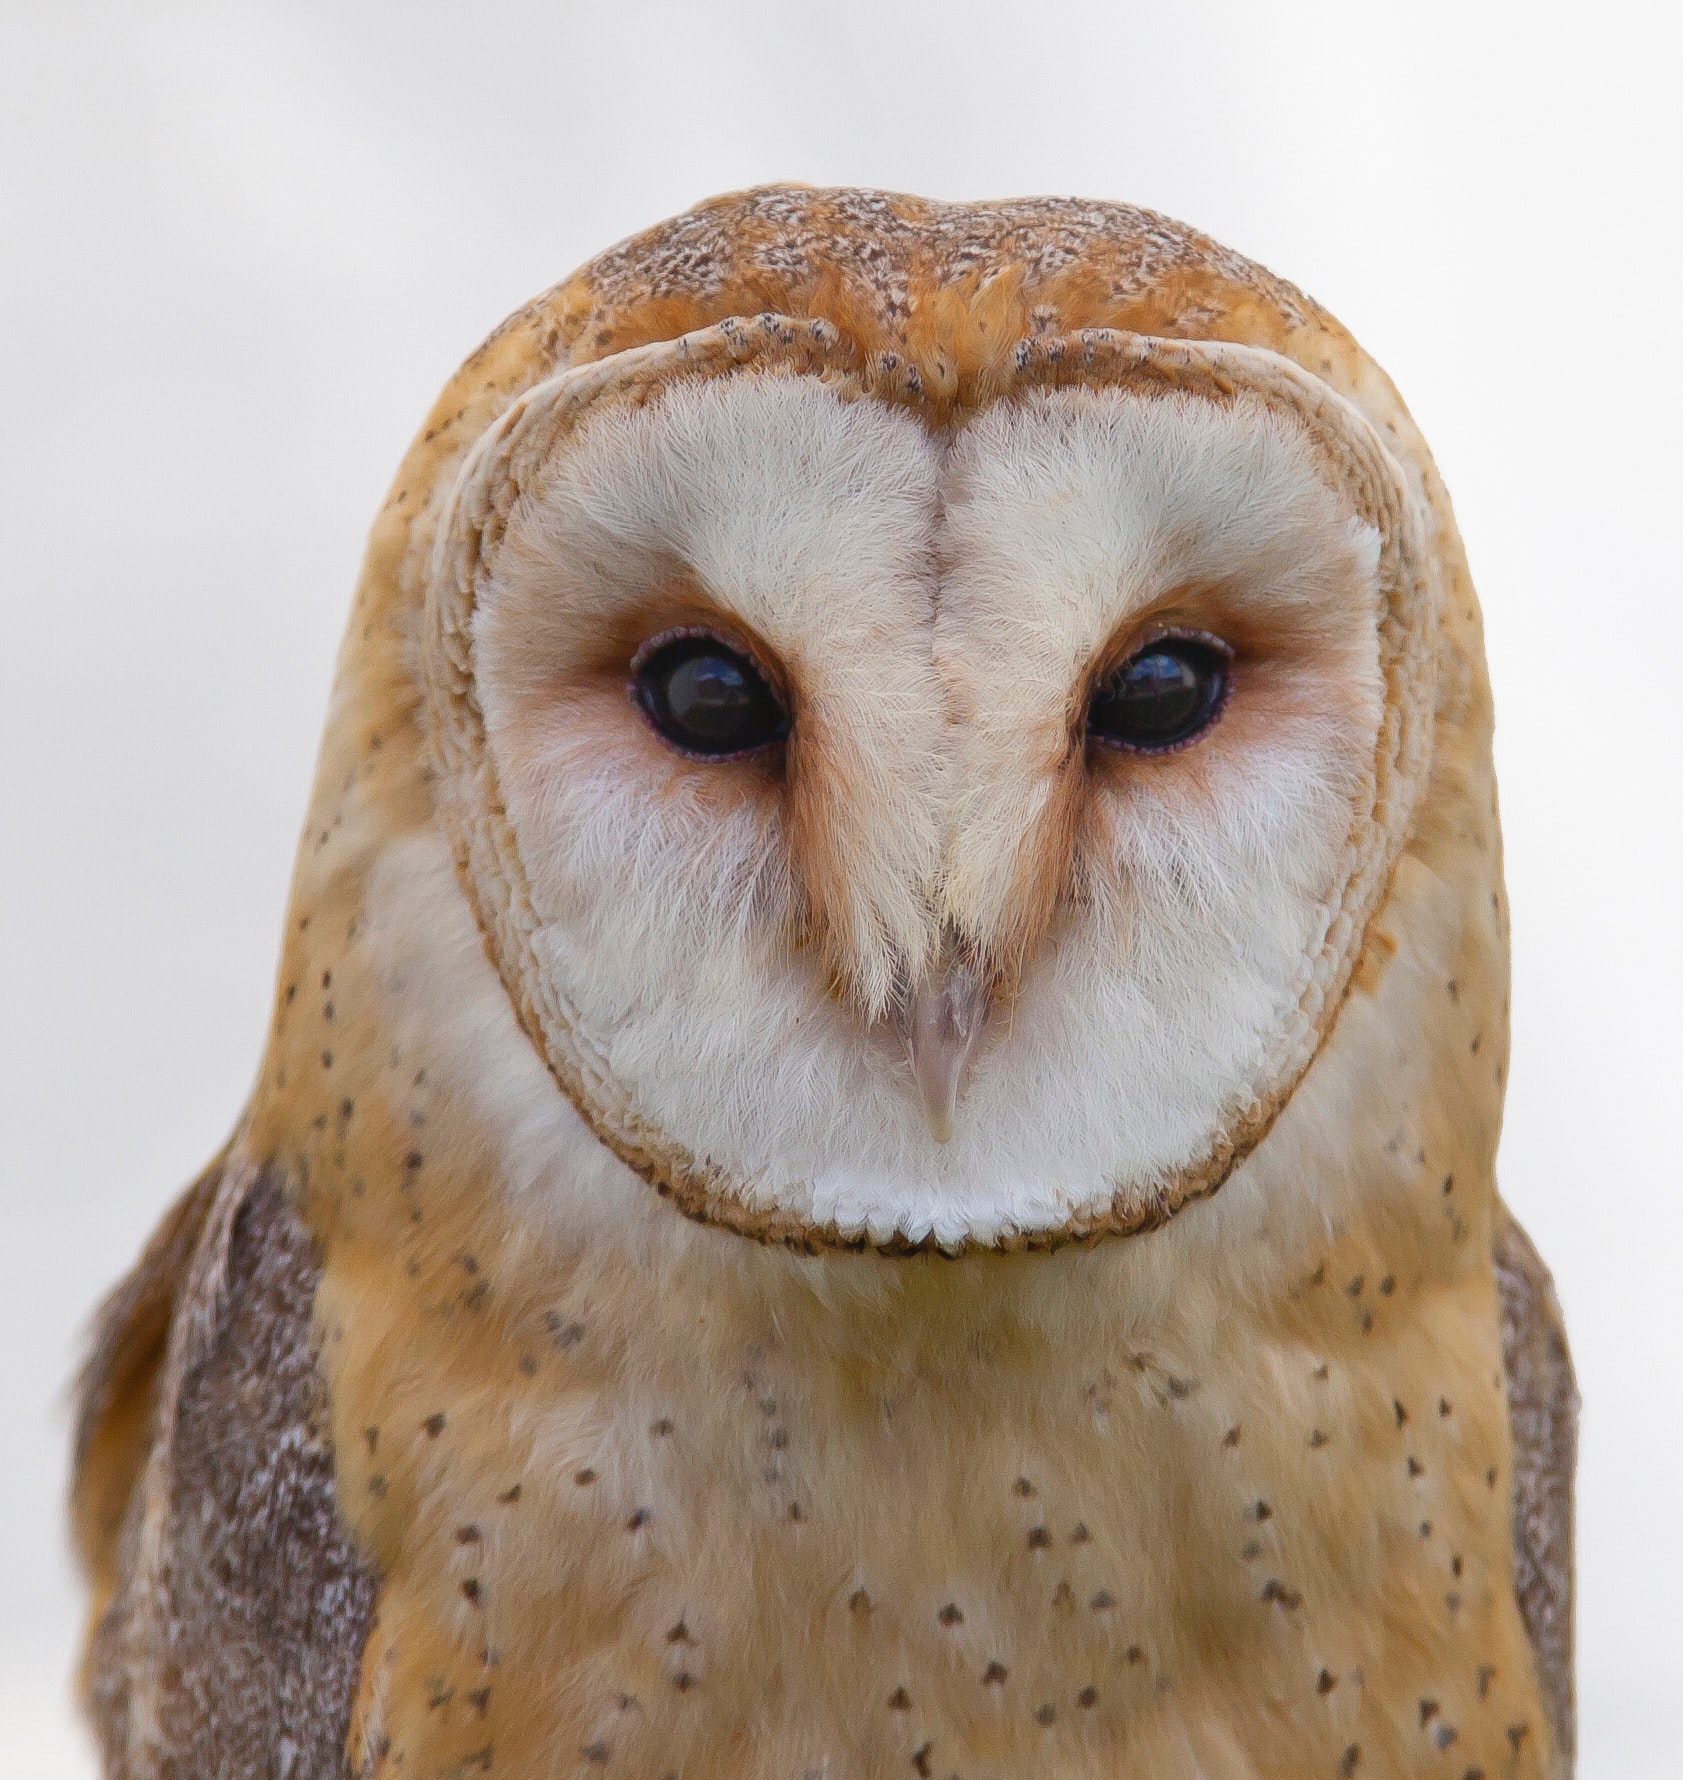 White and brown owl photo